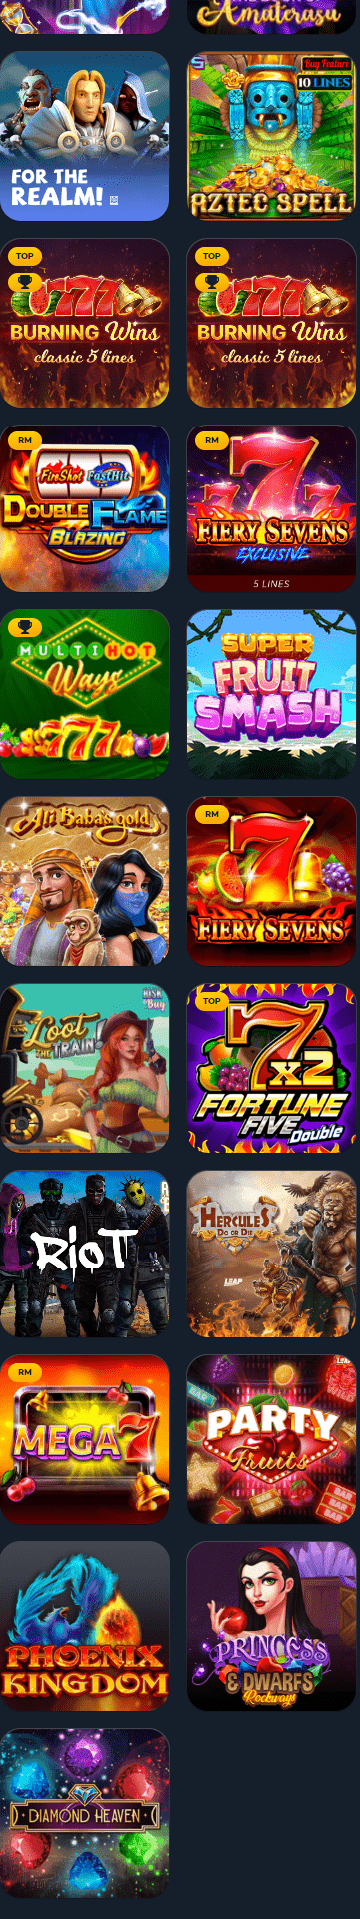 VIVI The Only Casino Site You Need For Indian Gaming Fun